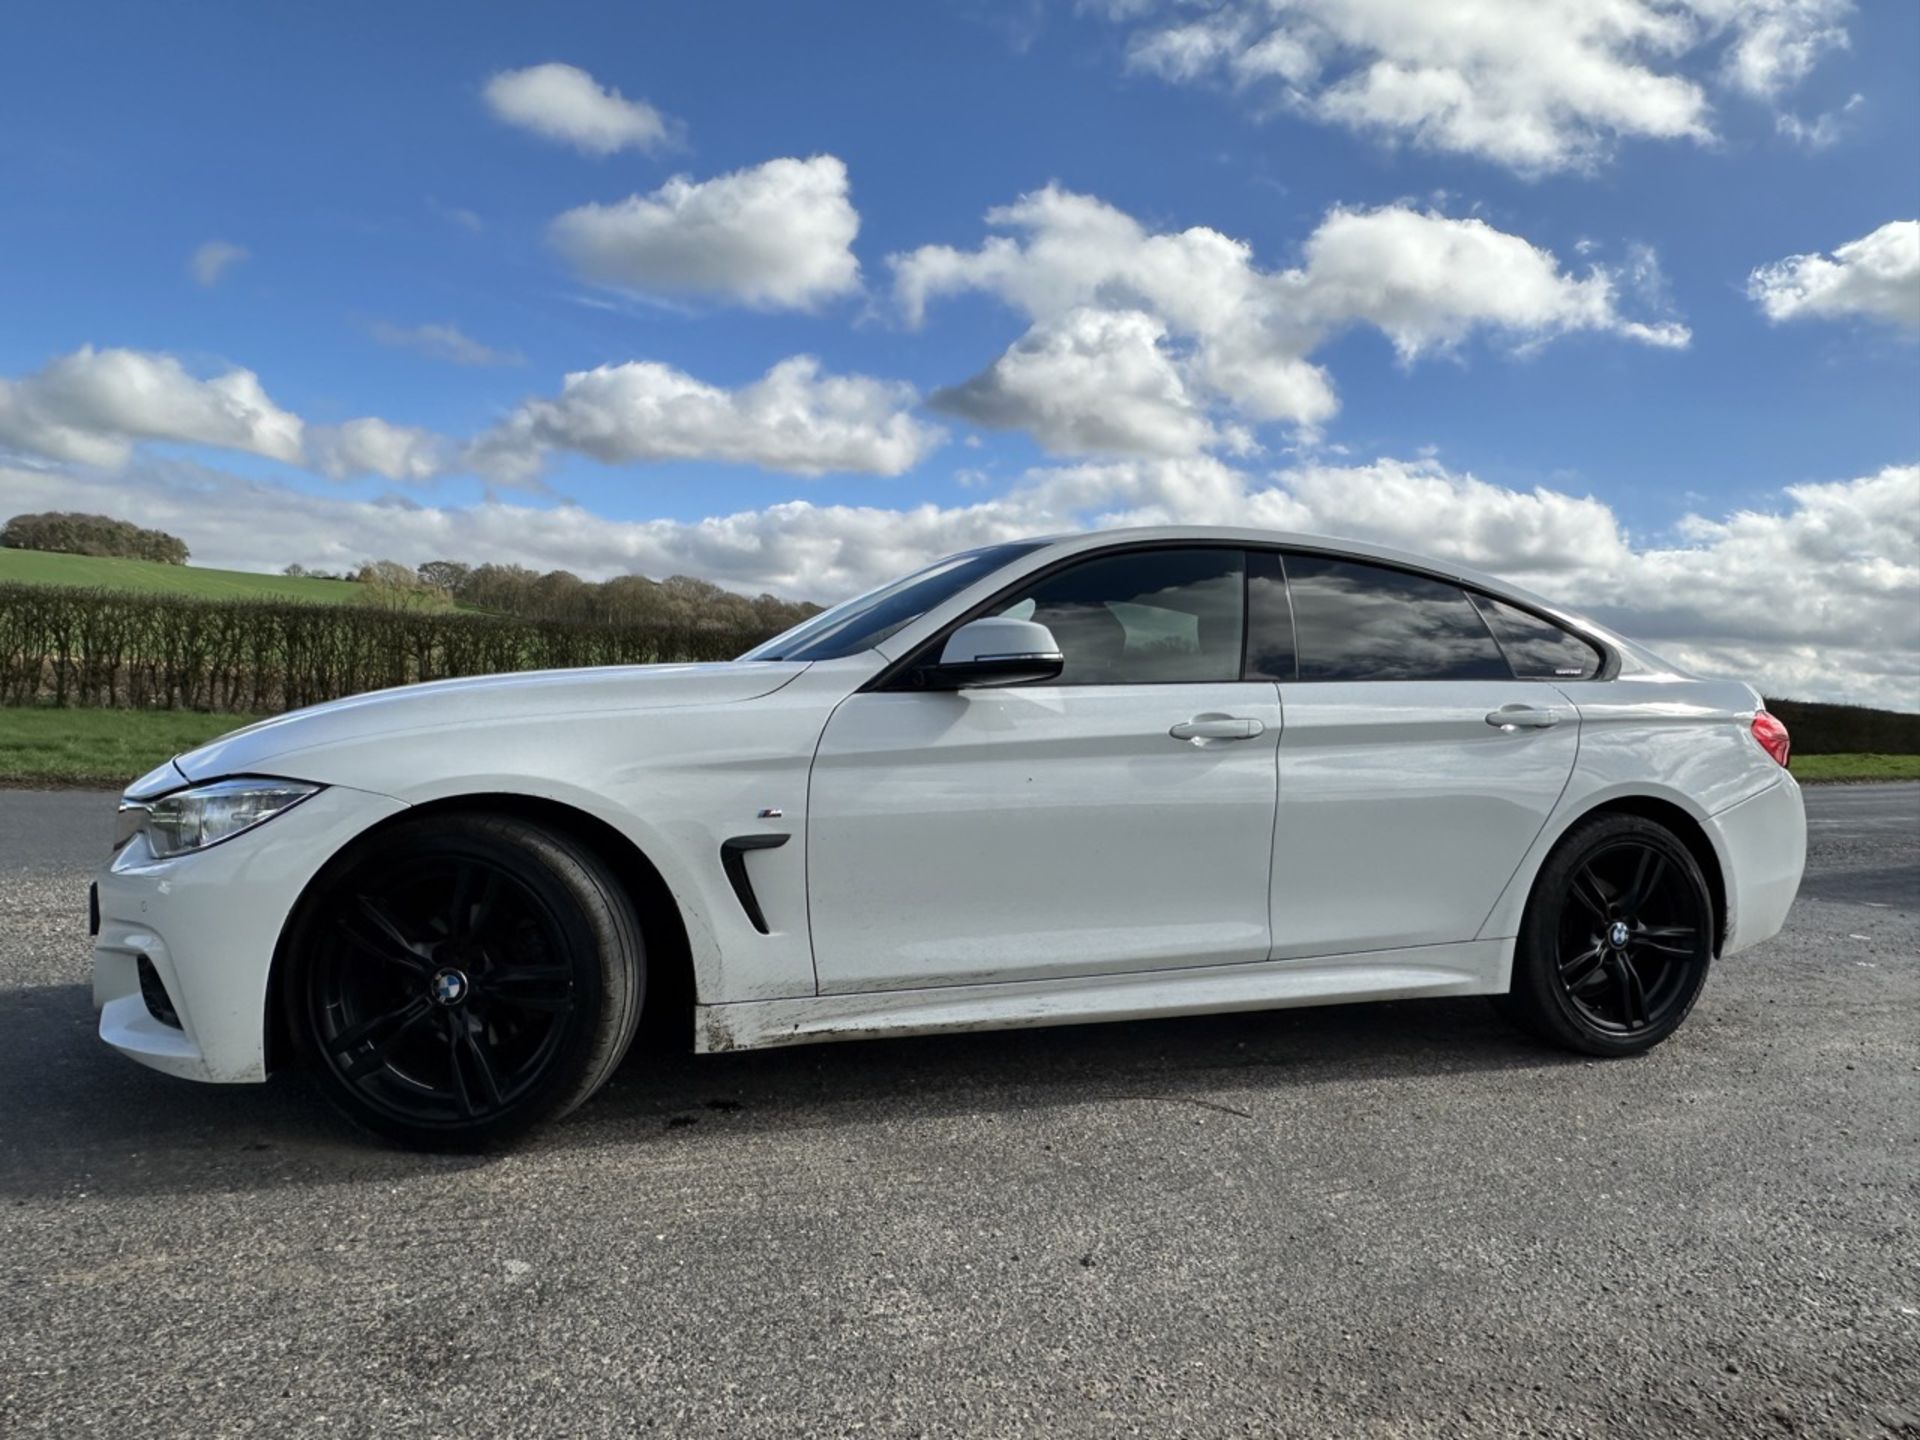 BMW 4 SERIES 420i M Sport 5dr [Professional Media] Manual - Petrol - 2.0 - Coupe- 54k miles - 2016 - Image 8 of 13